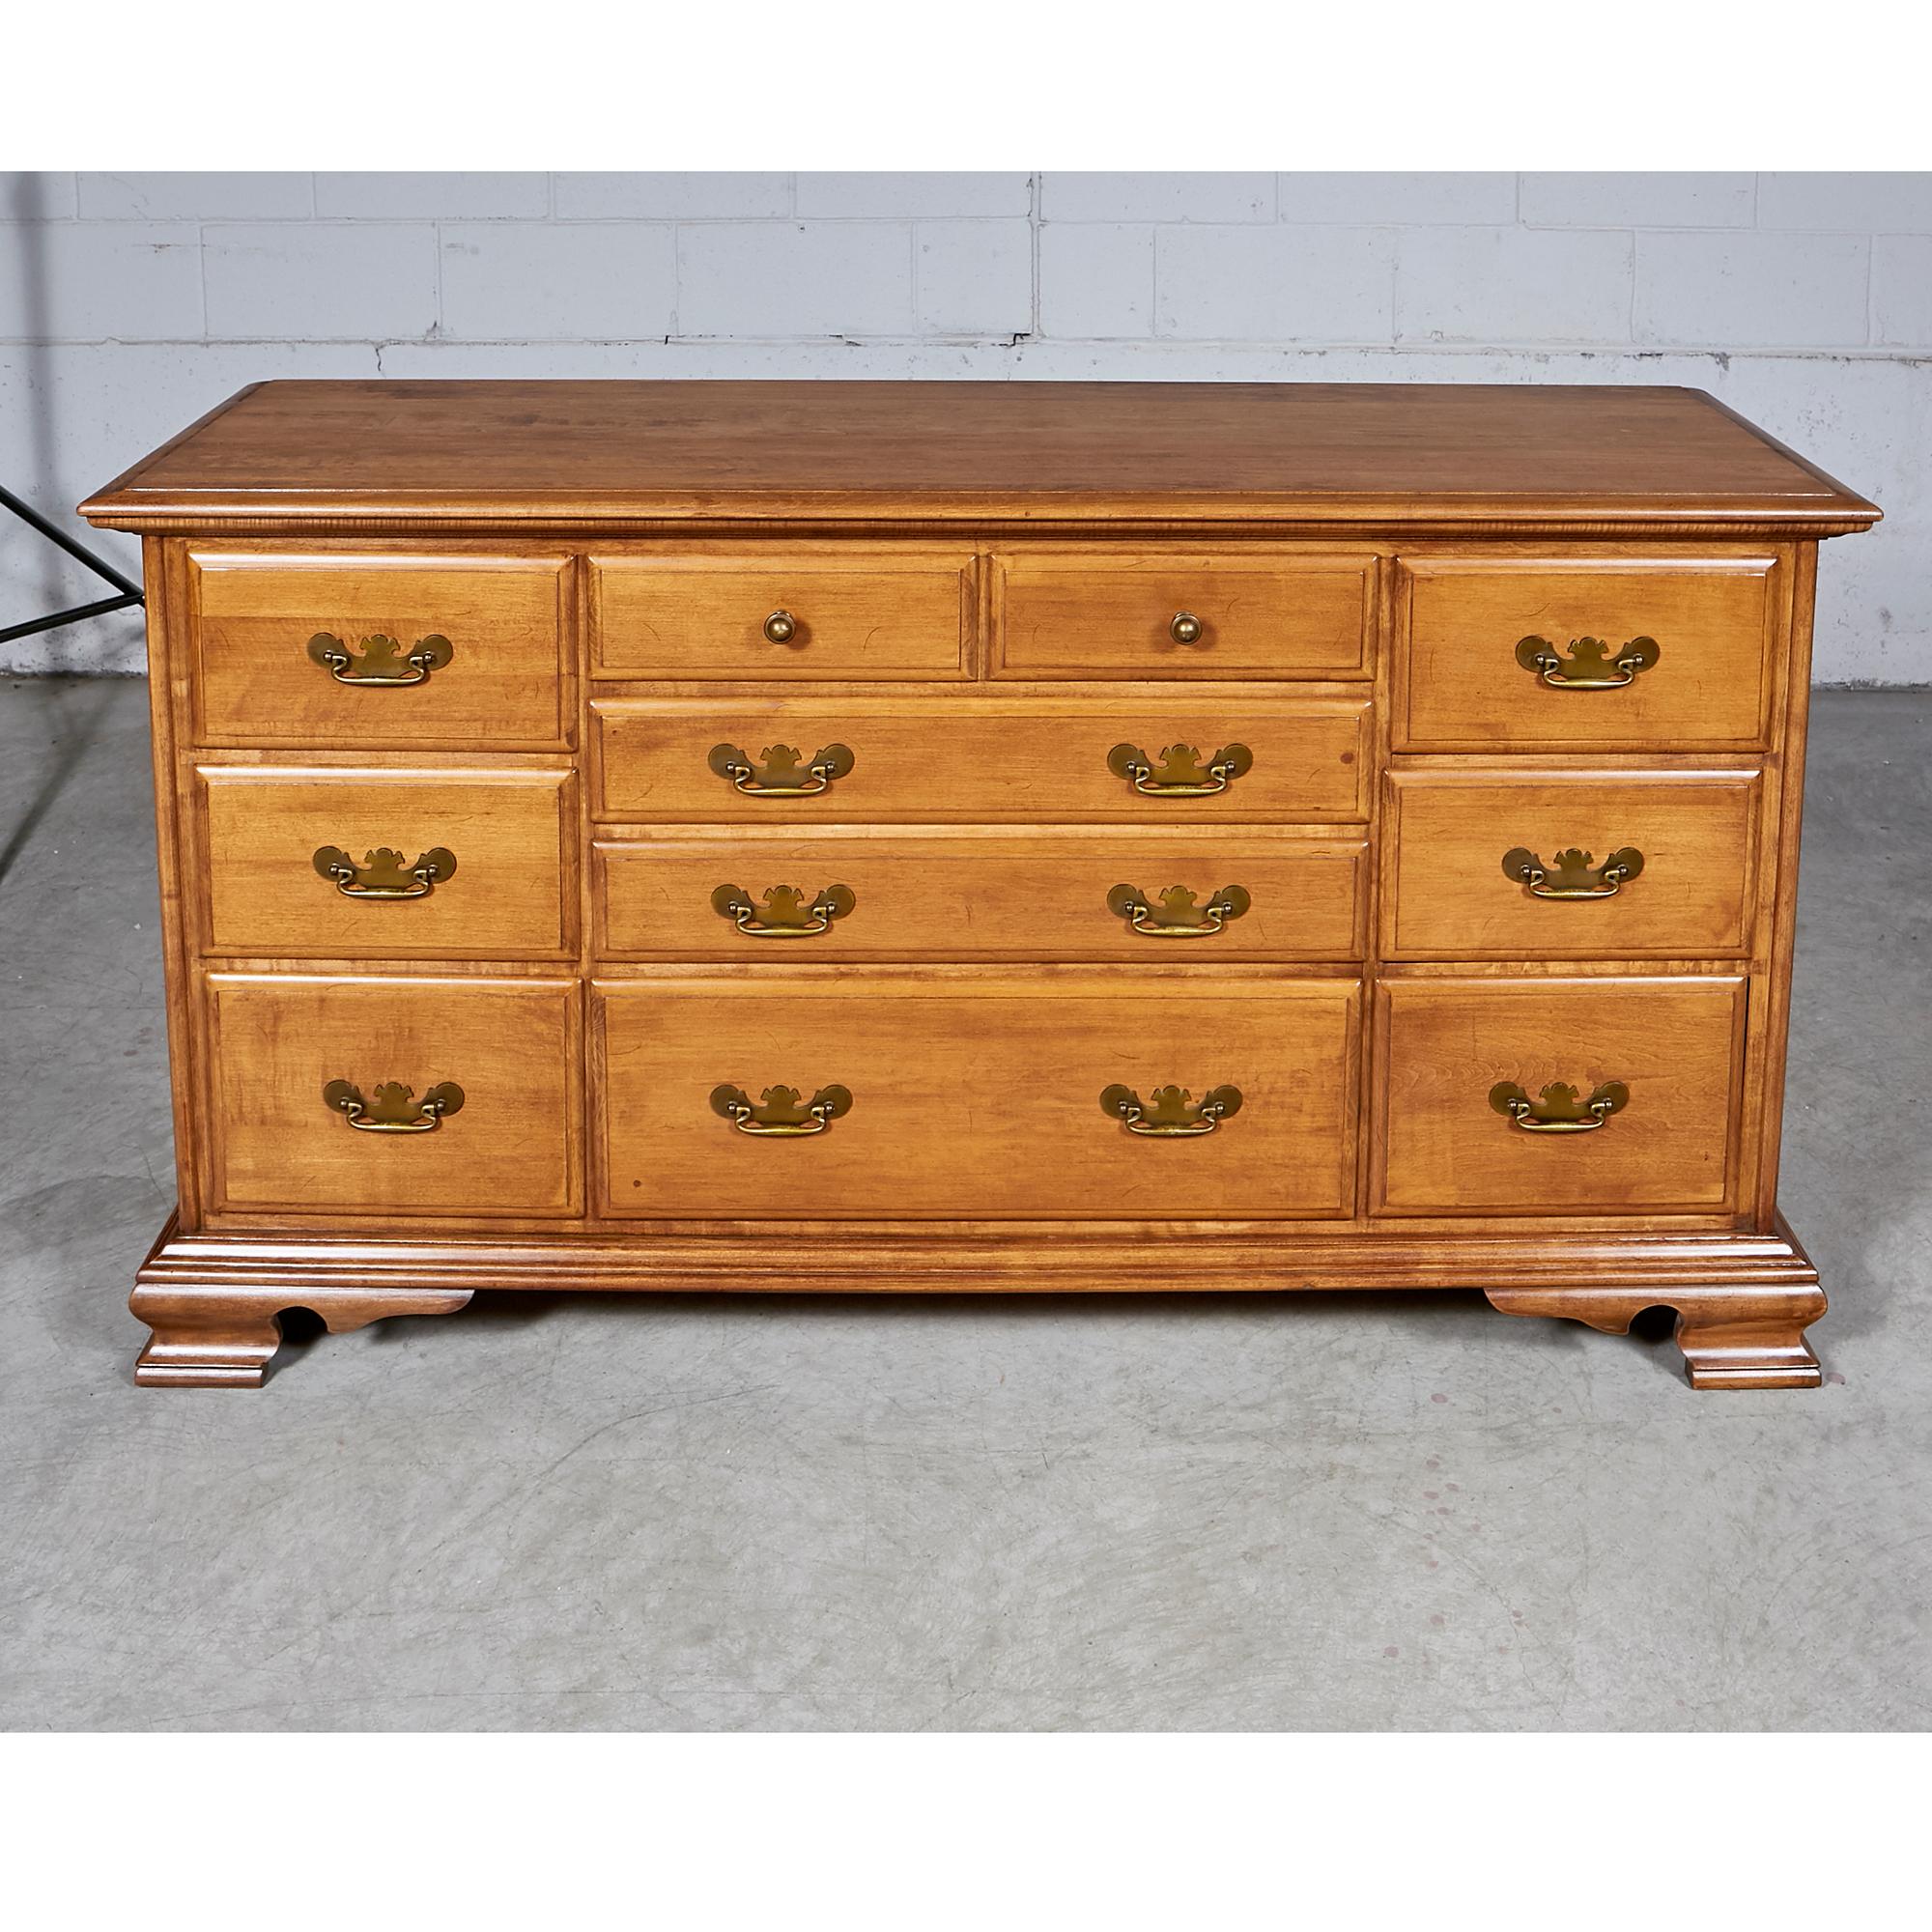 Vintage 1960s Conant Ball maple wood low dresser with 11 drawers for storage. In newly refinished condition. Marked in the drawer.